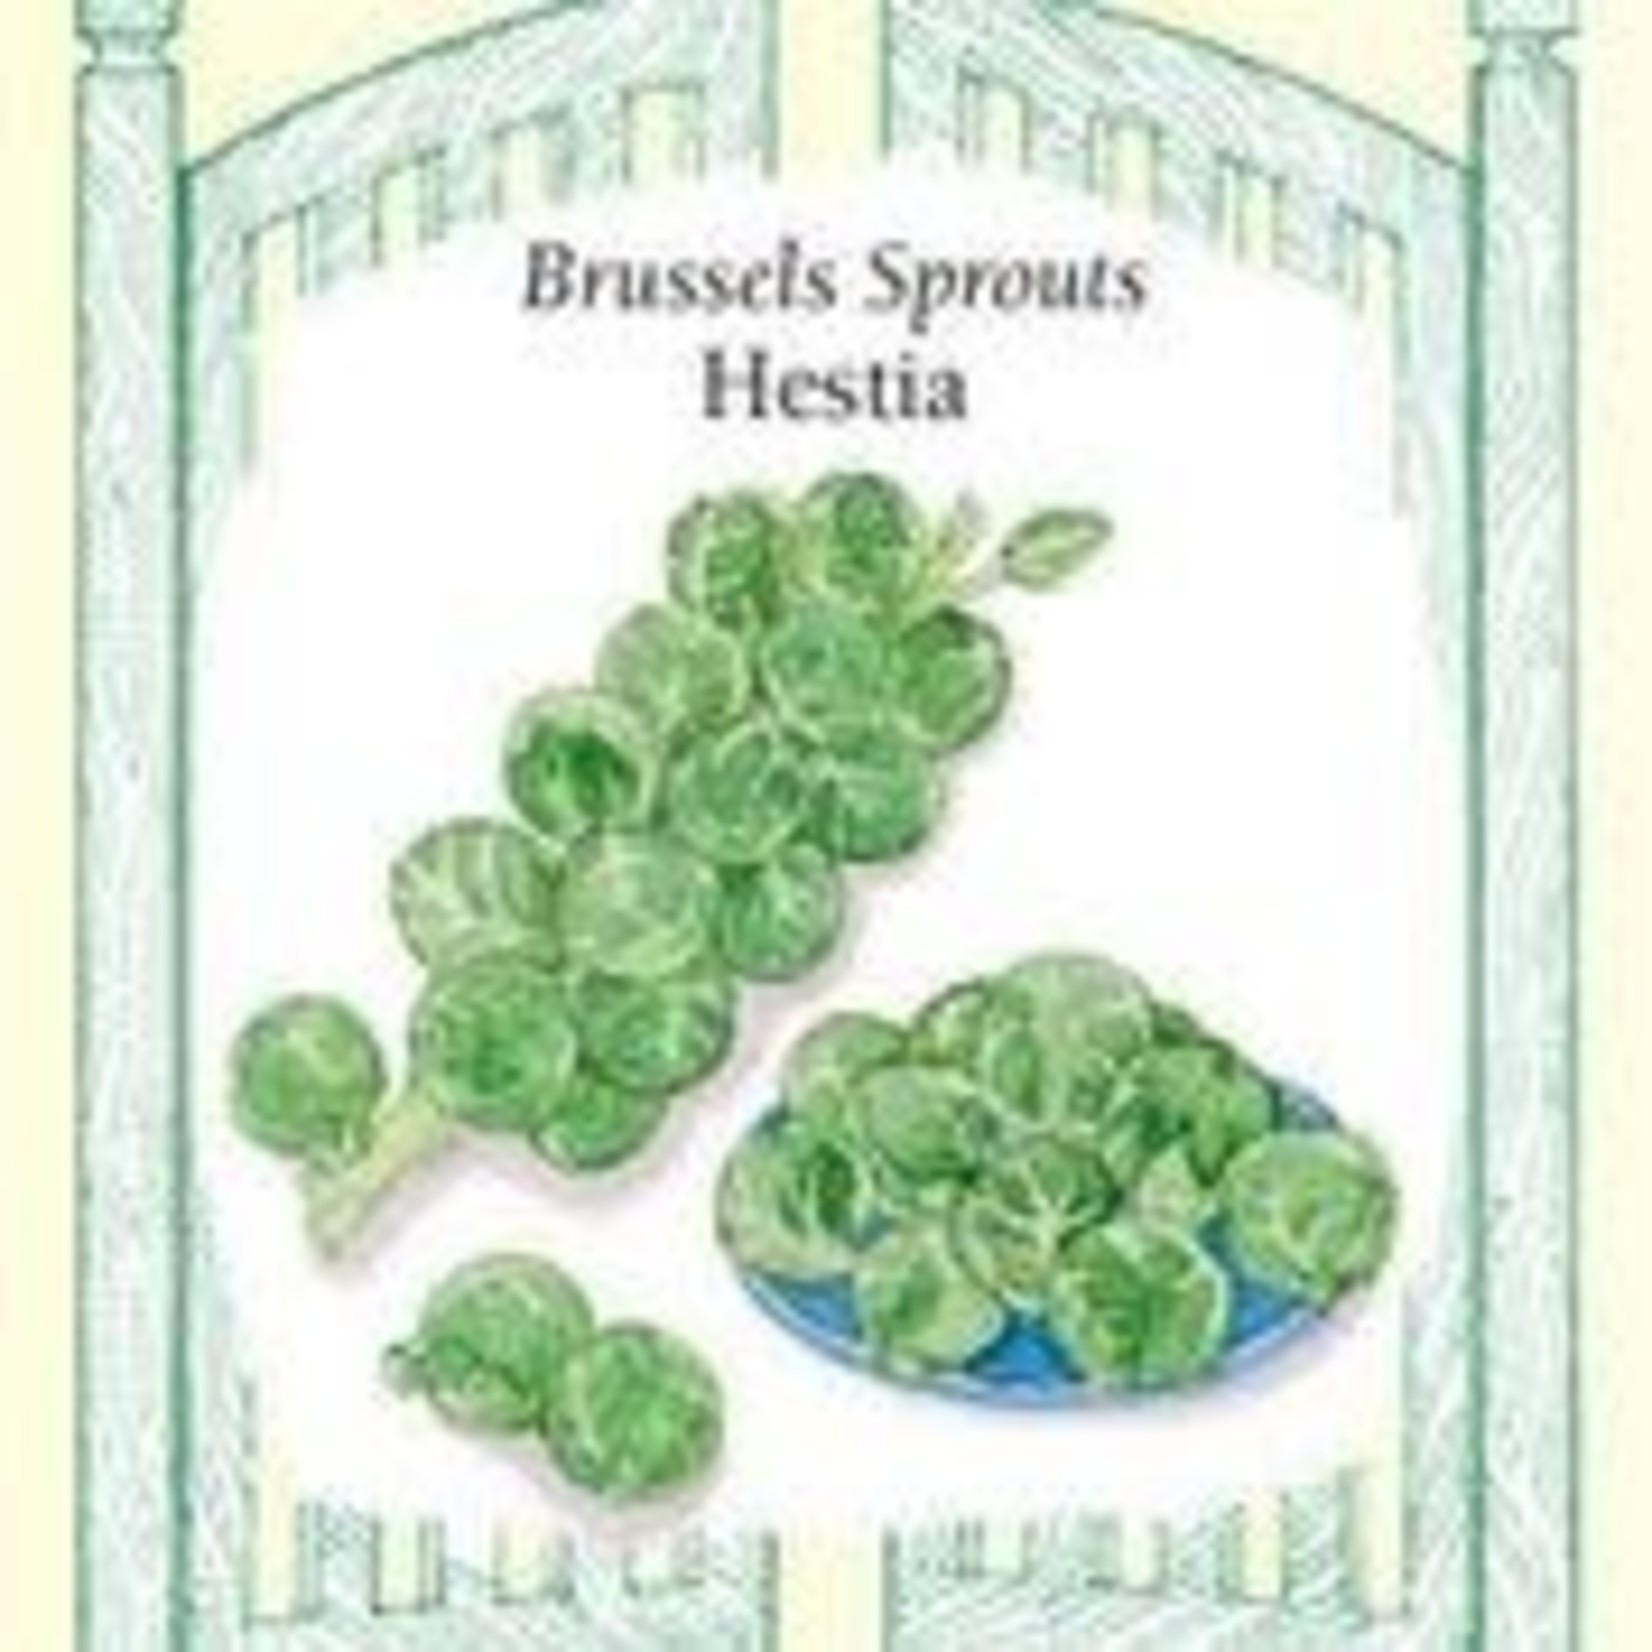 Renee's Brussels Sprouts Hestia Seeds